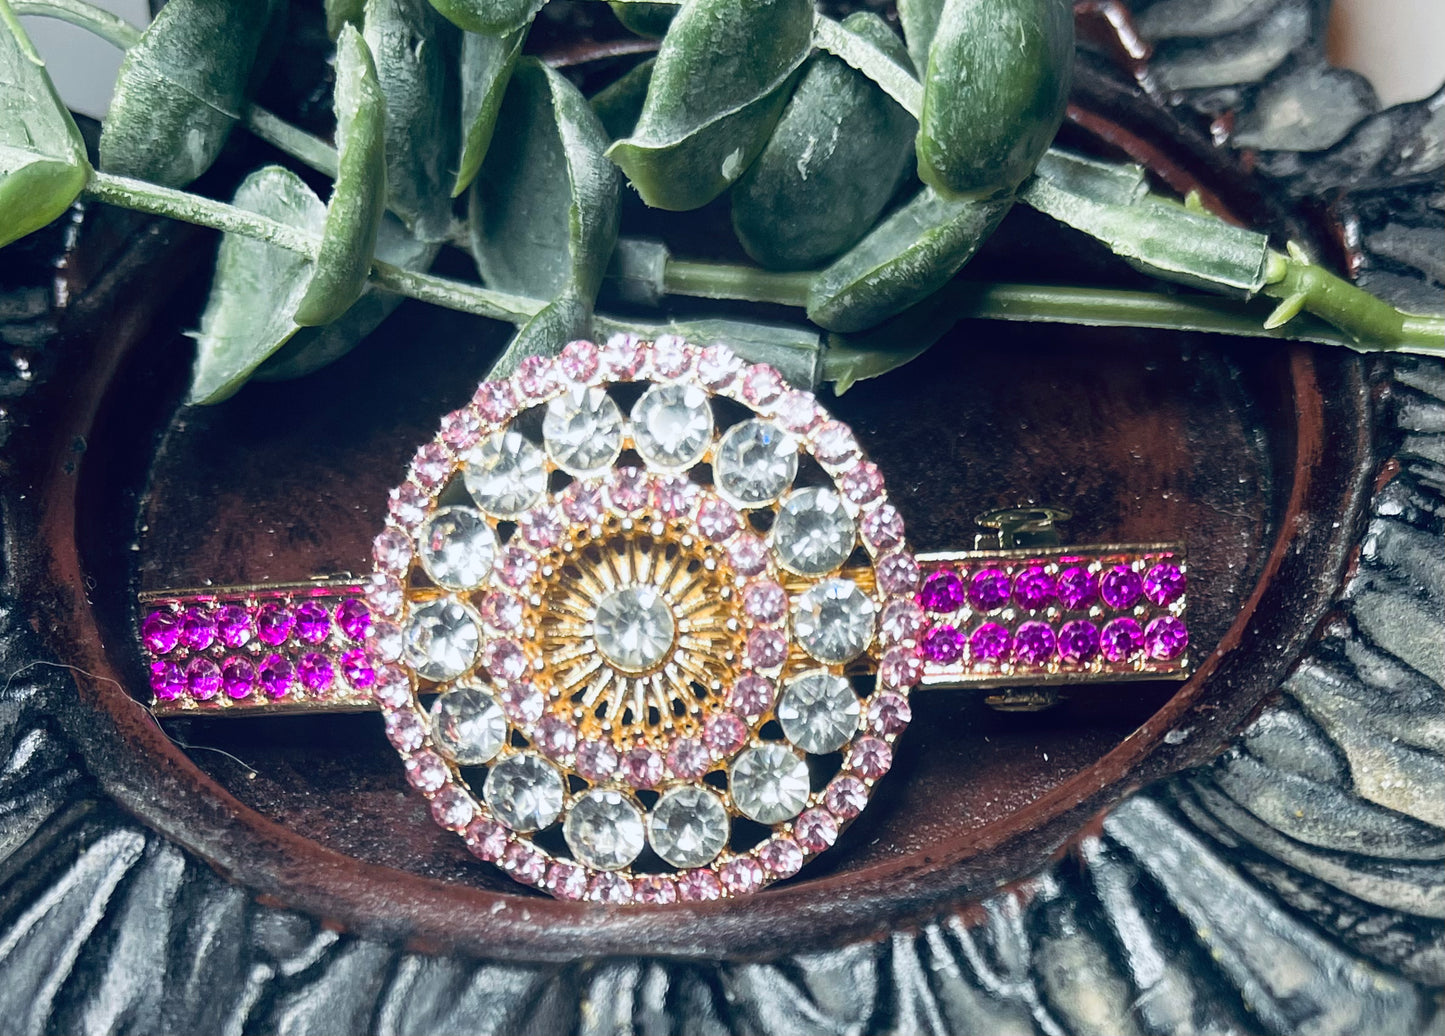 Hot pink Crystal round rhinestone barrette approximately 3.0” gold tone formal hair accessories gift wedding bridesmaid prom birthday mother of bride groom